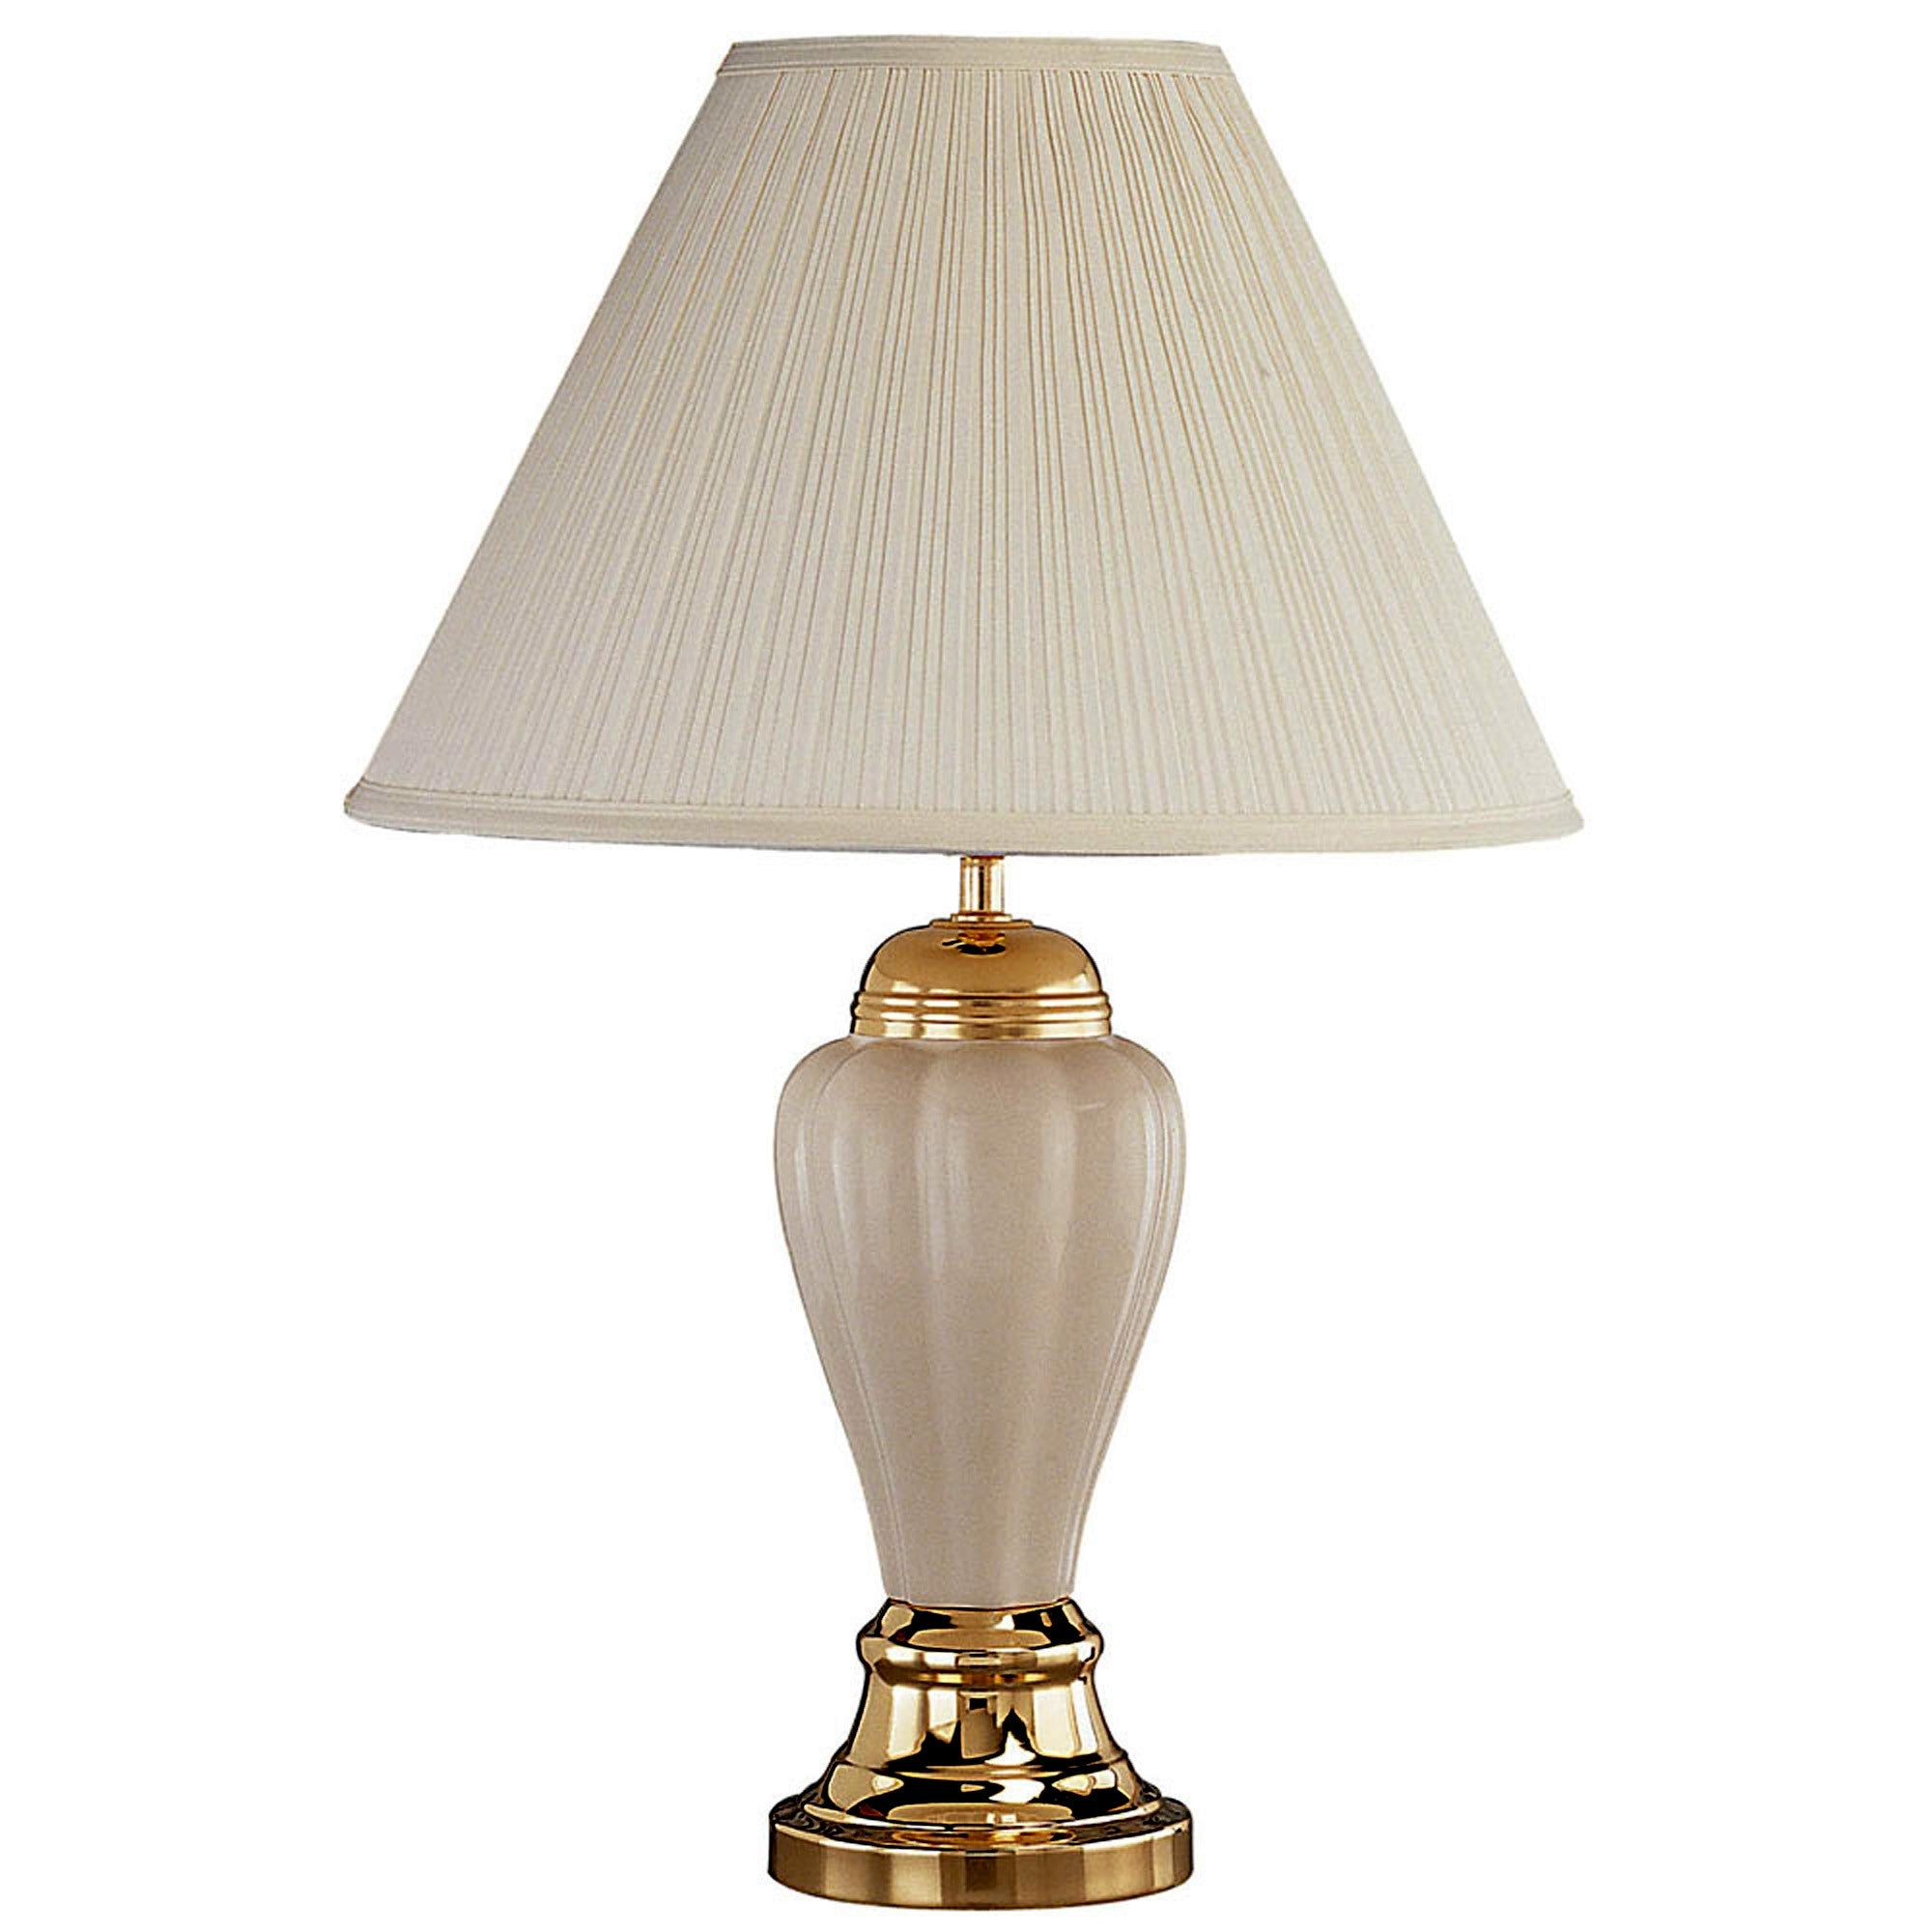 27" Ivory and Gold Ceramic Urn Table Lamp With Off White Empire Shade